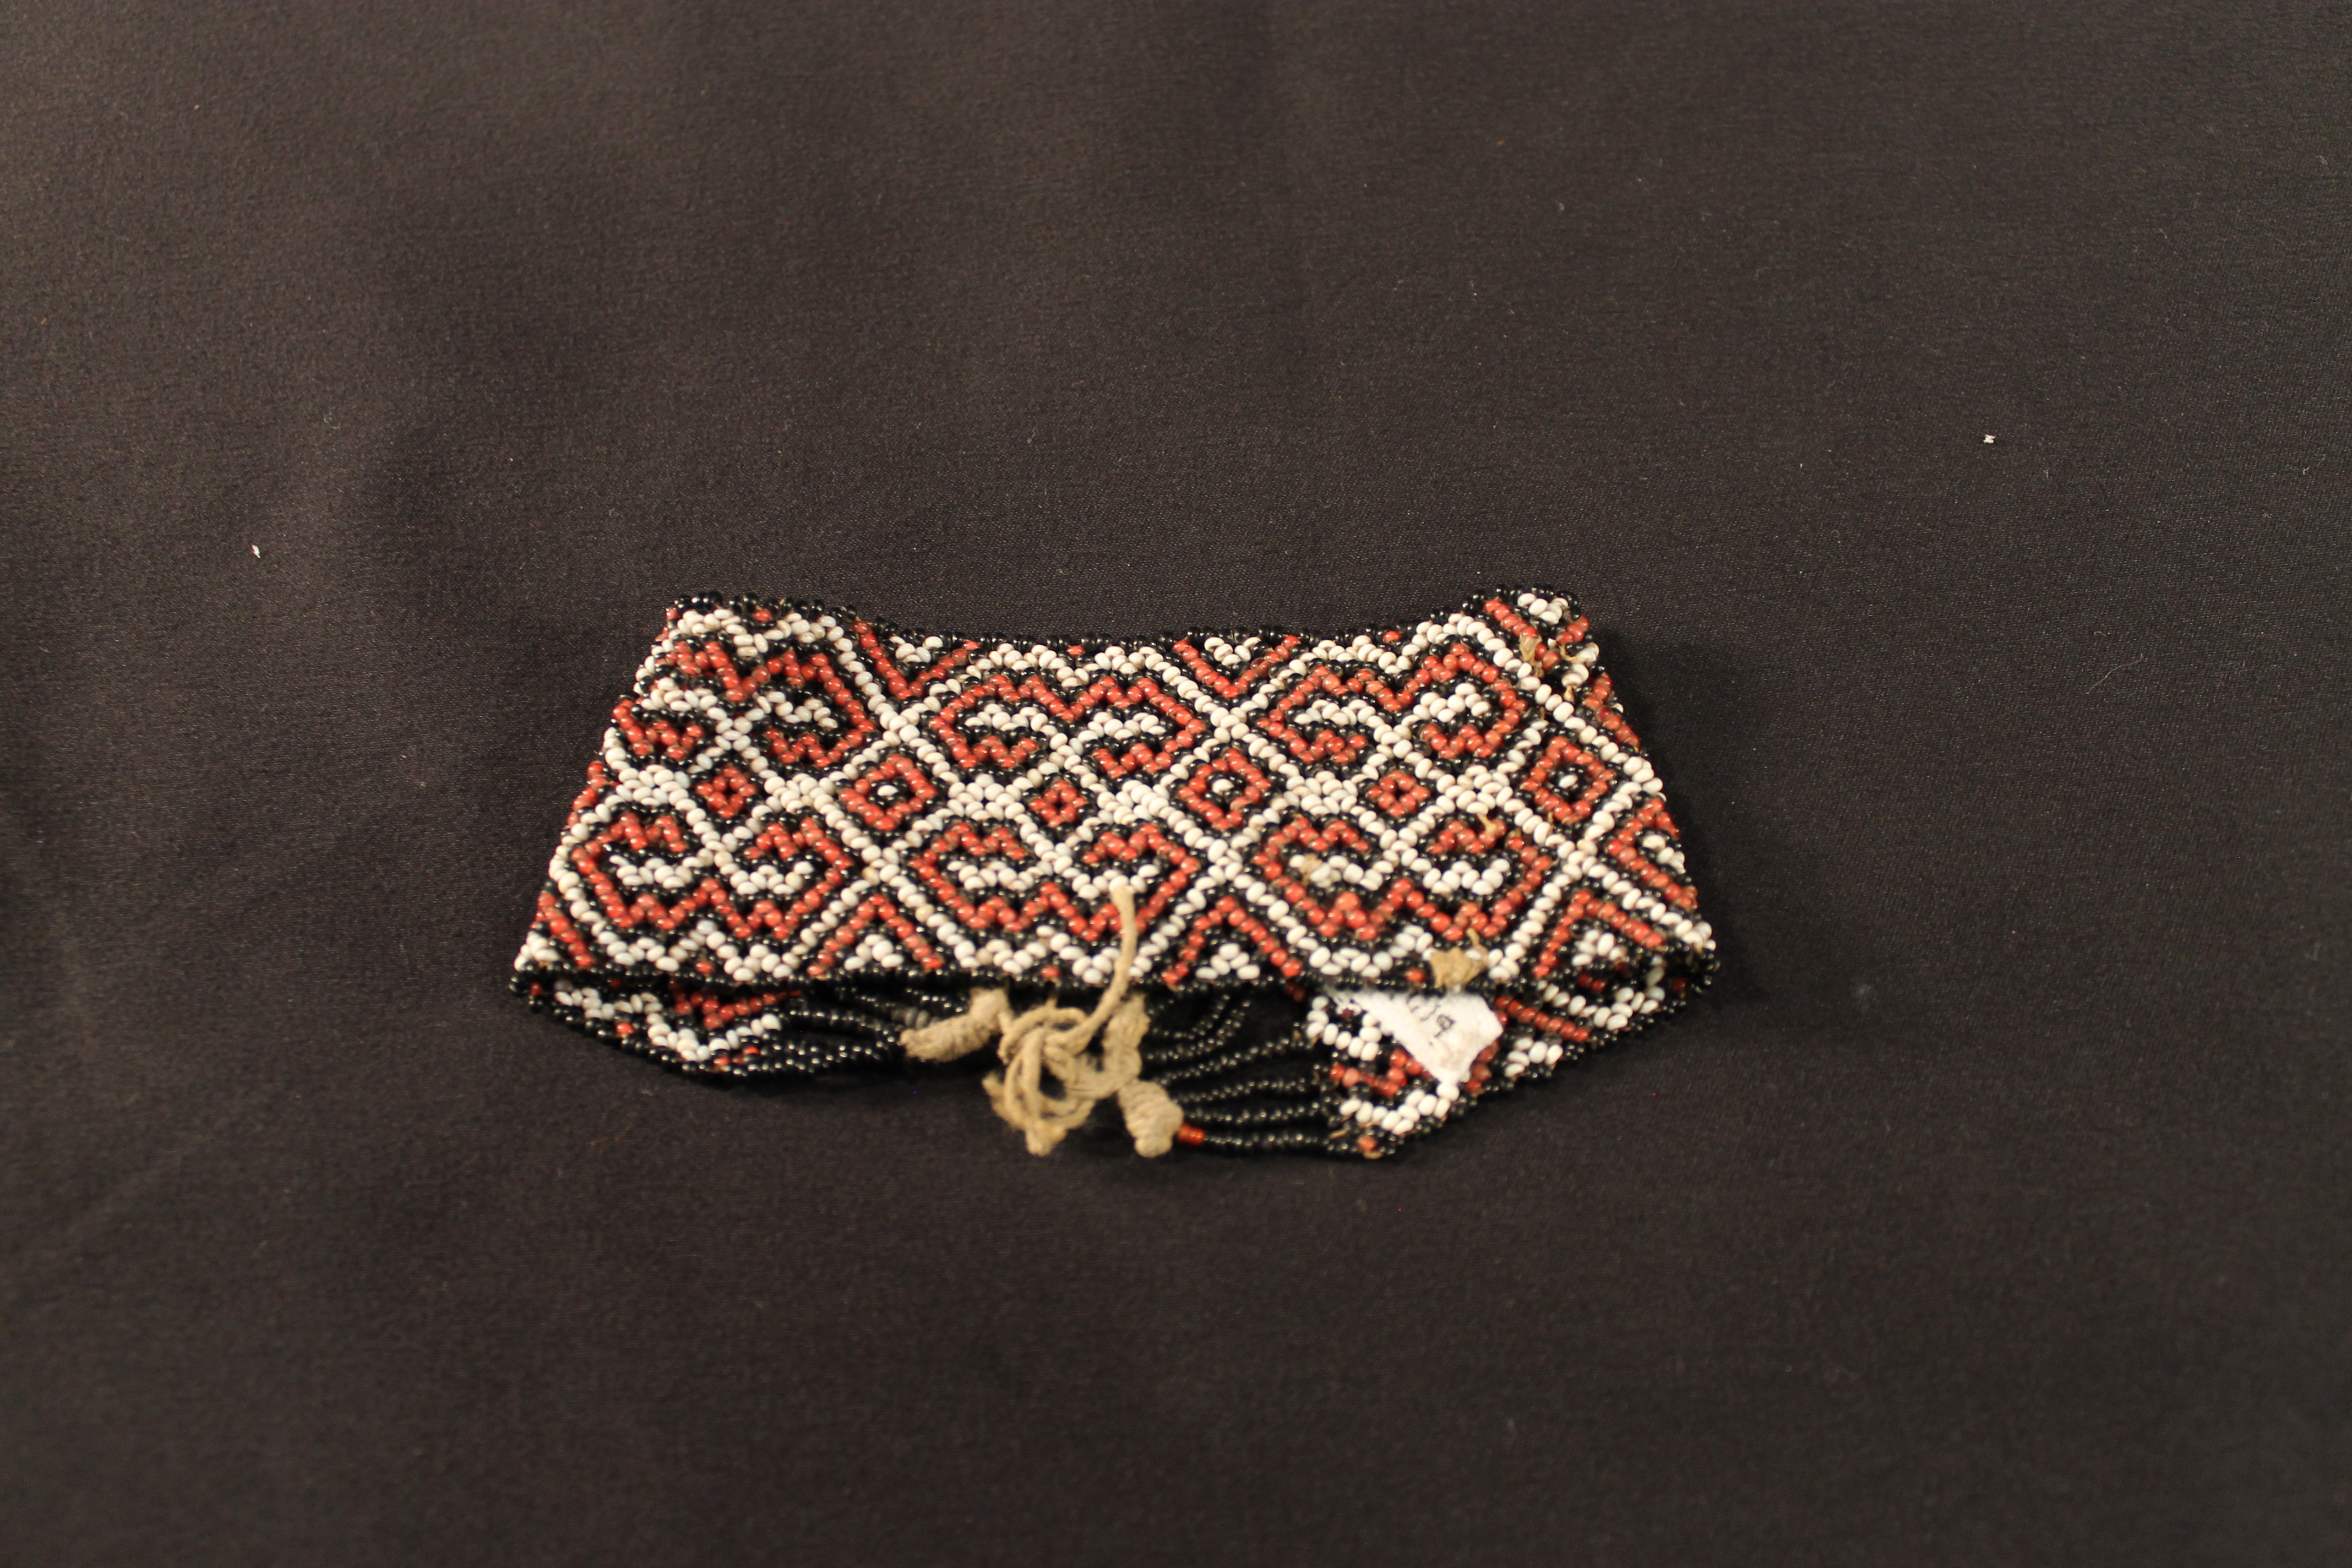 Loomed beadwork bracelet made of black, red, white beads. Tie closure on one side.